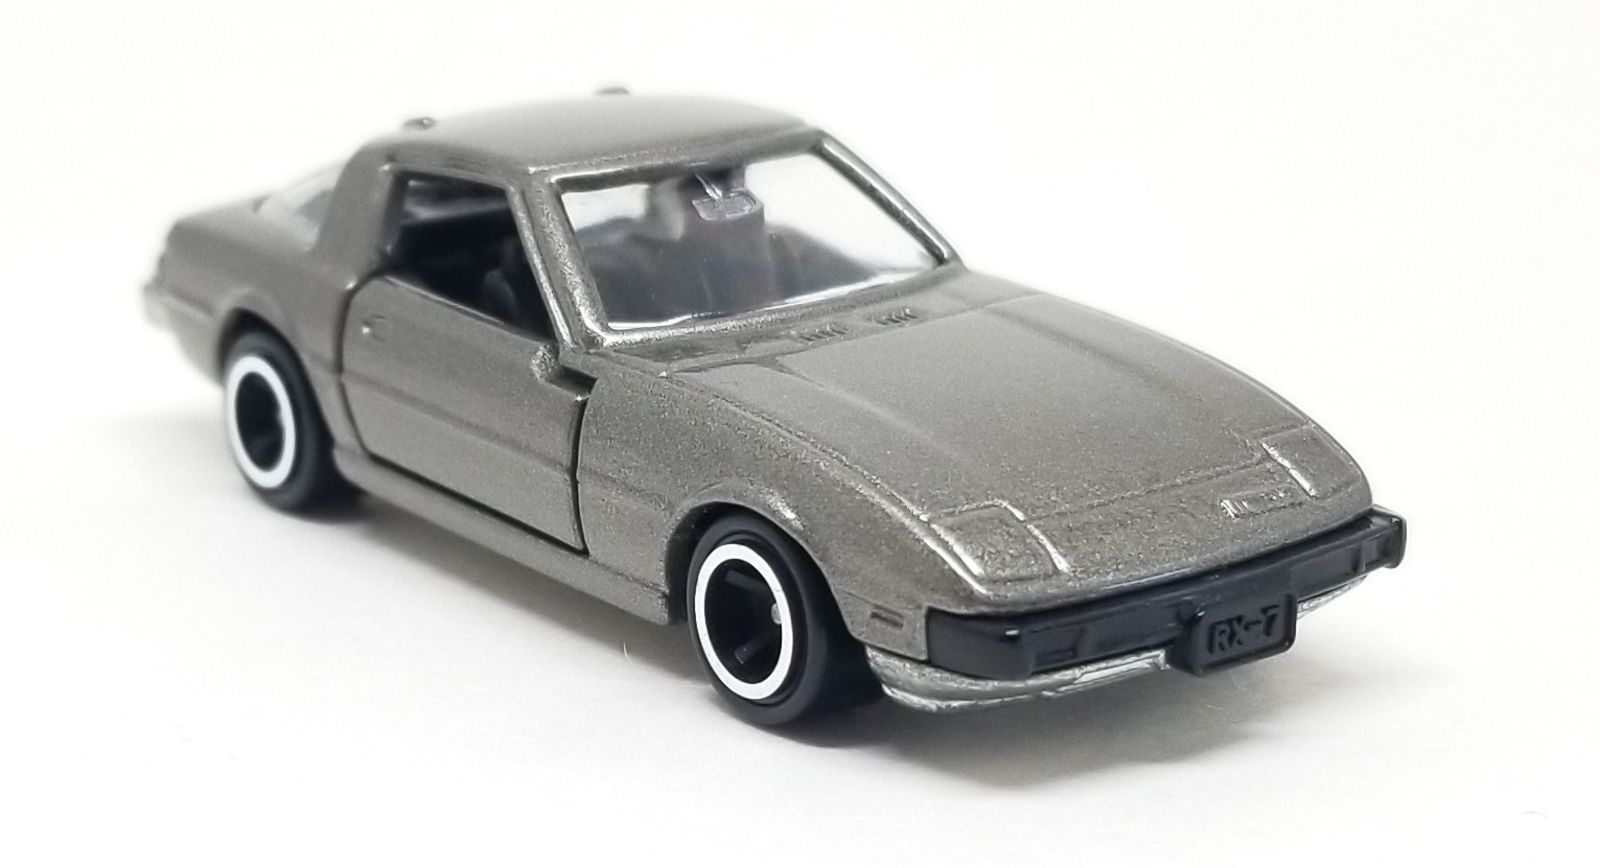 Illustration for article titled [REVIEW] Tomica Mazda Savanna RX-7